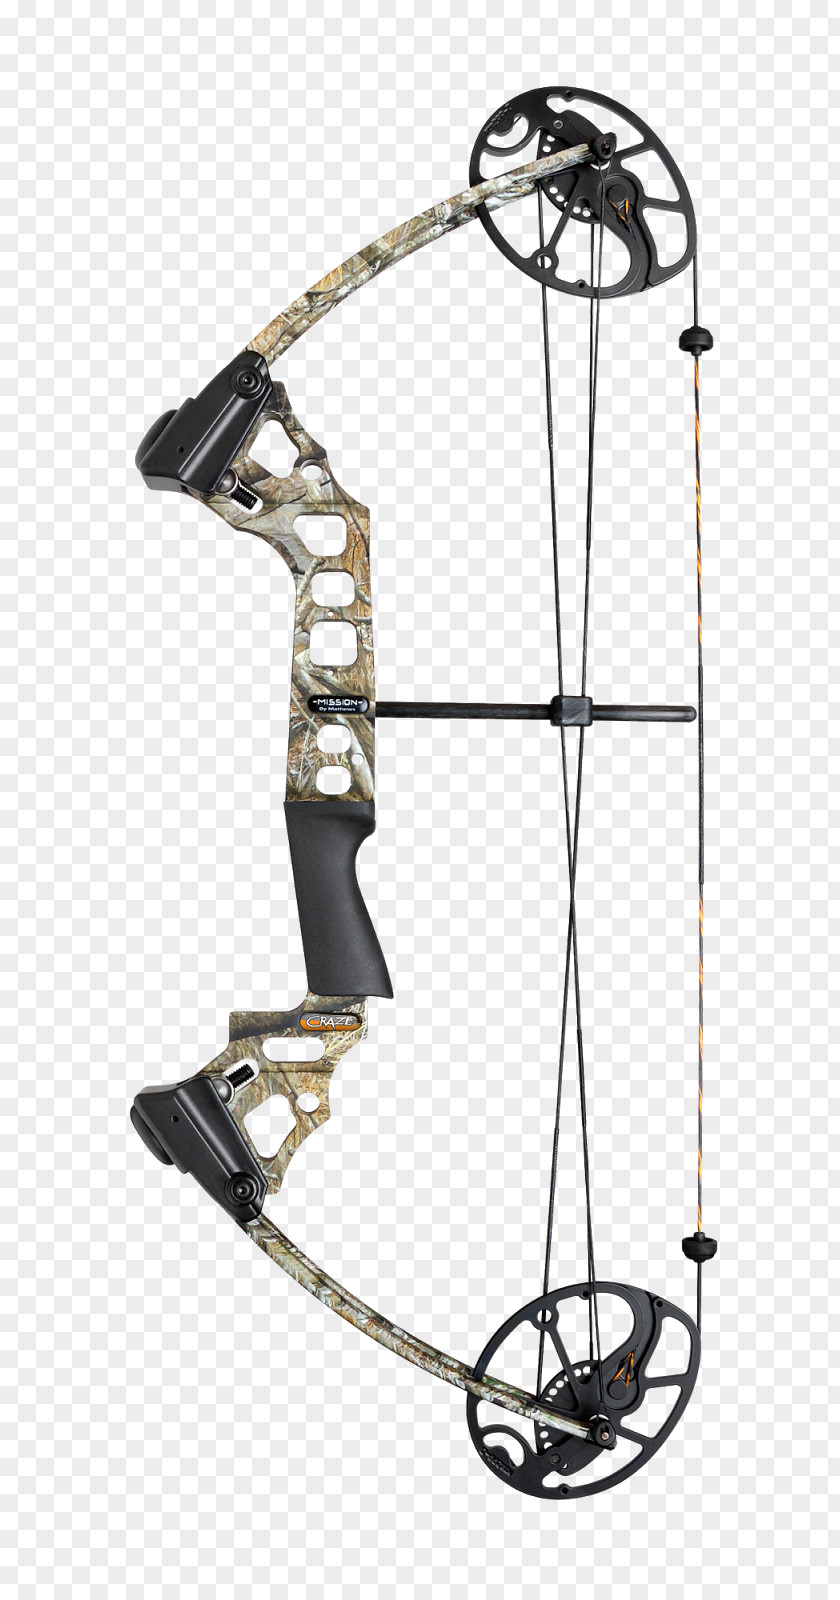 Compound Bows Bowhunting Bow And Arrow Archery PNG